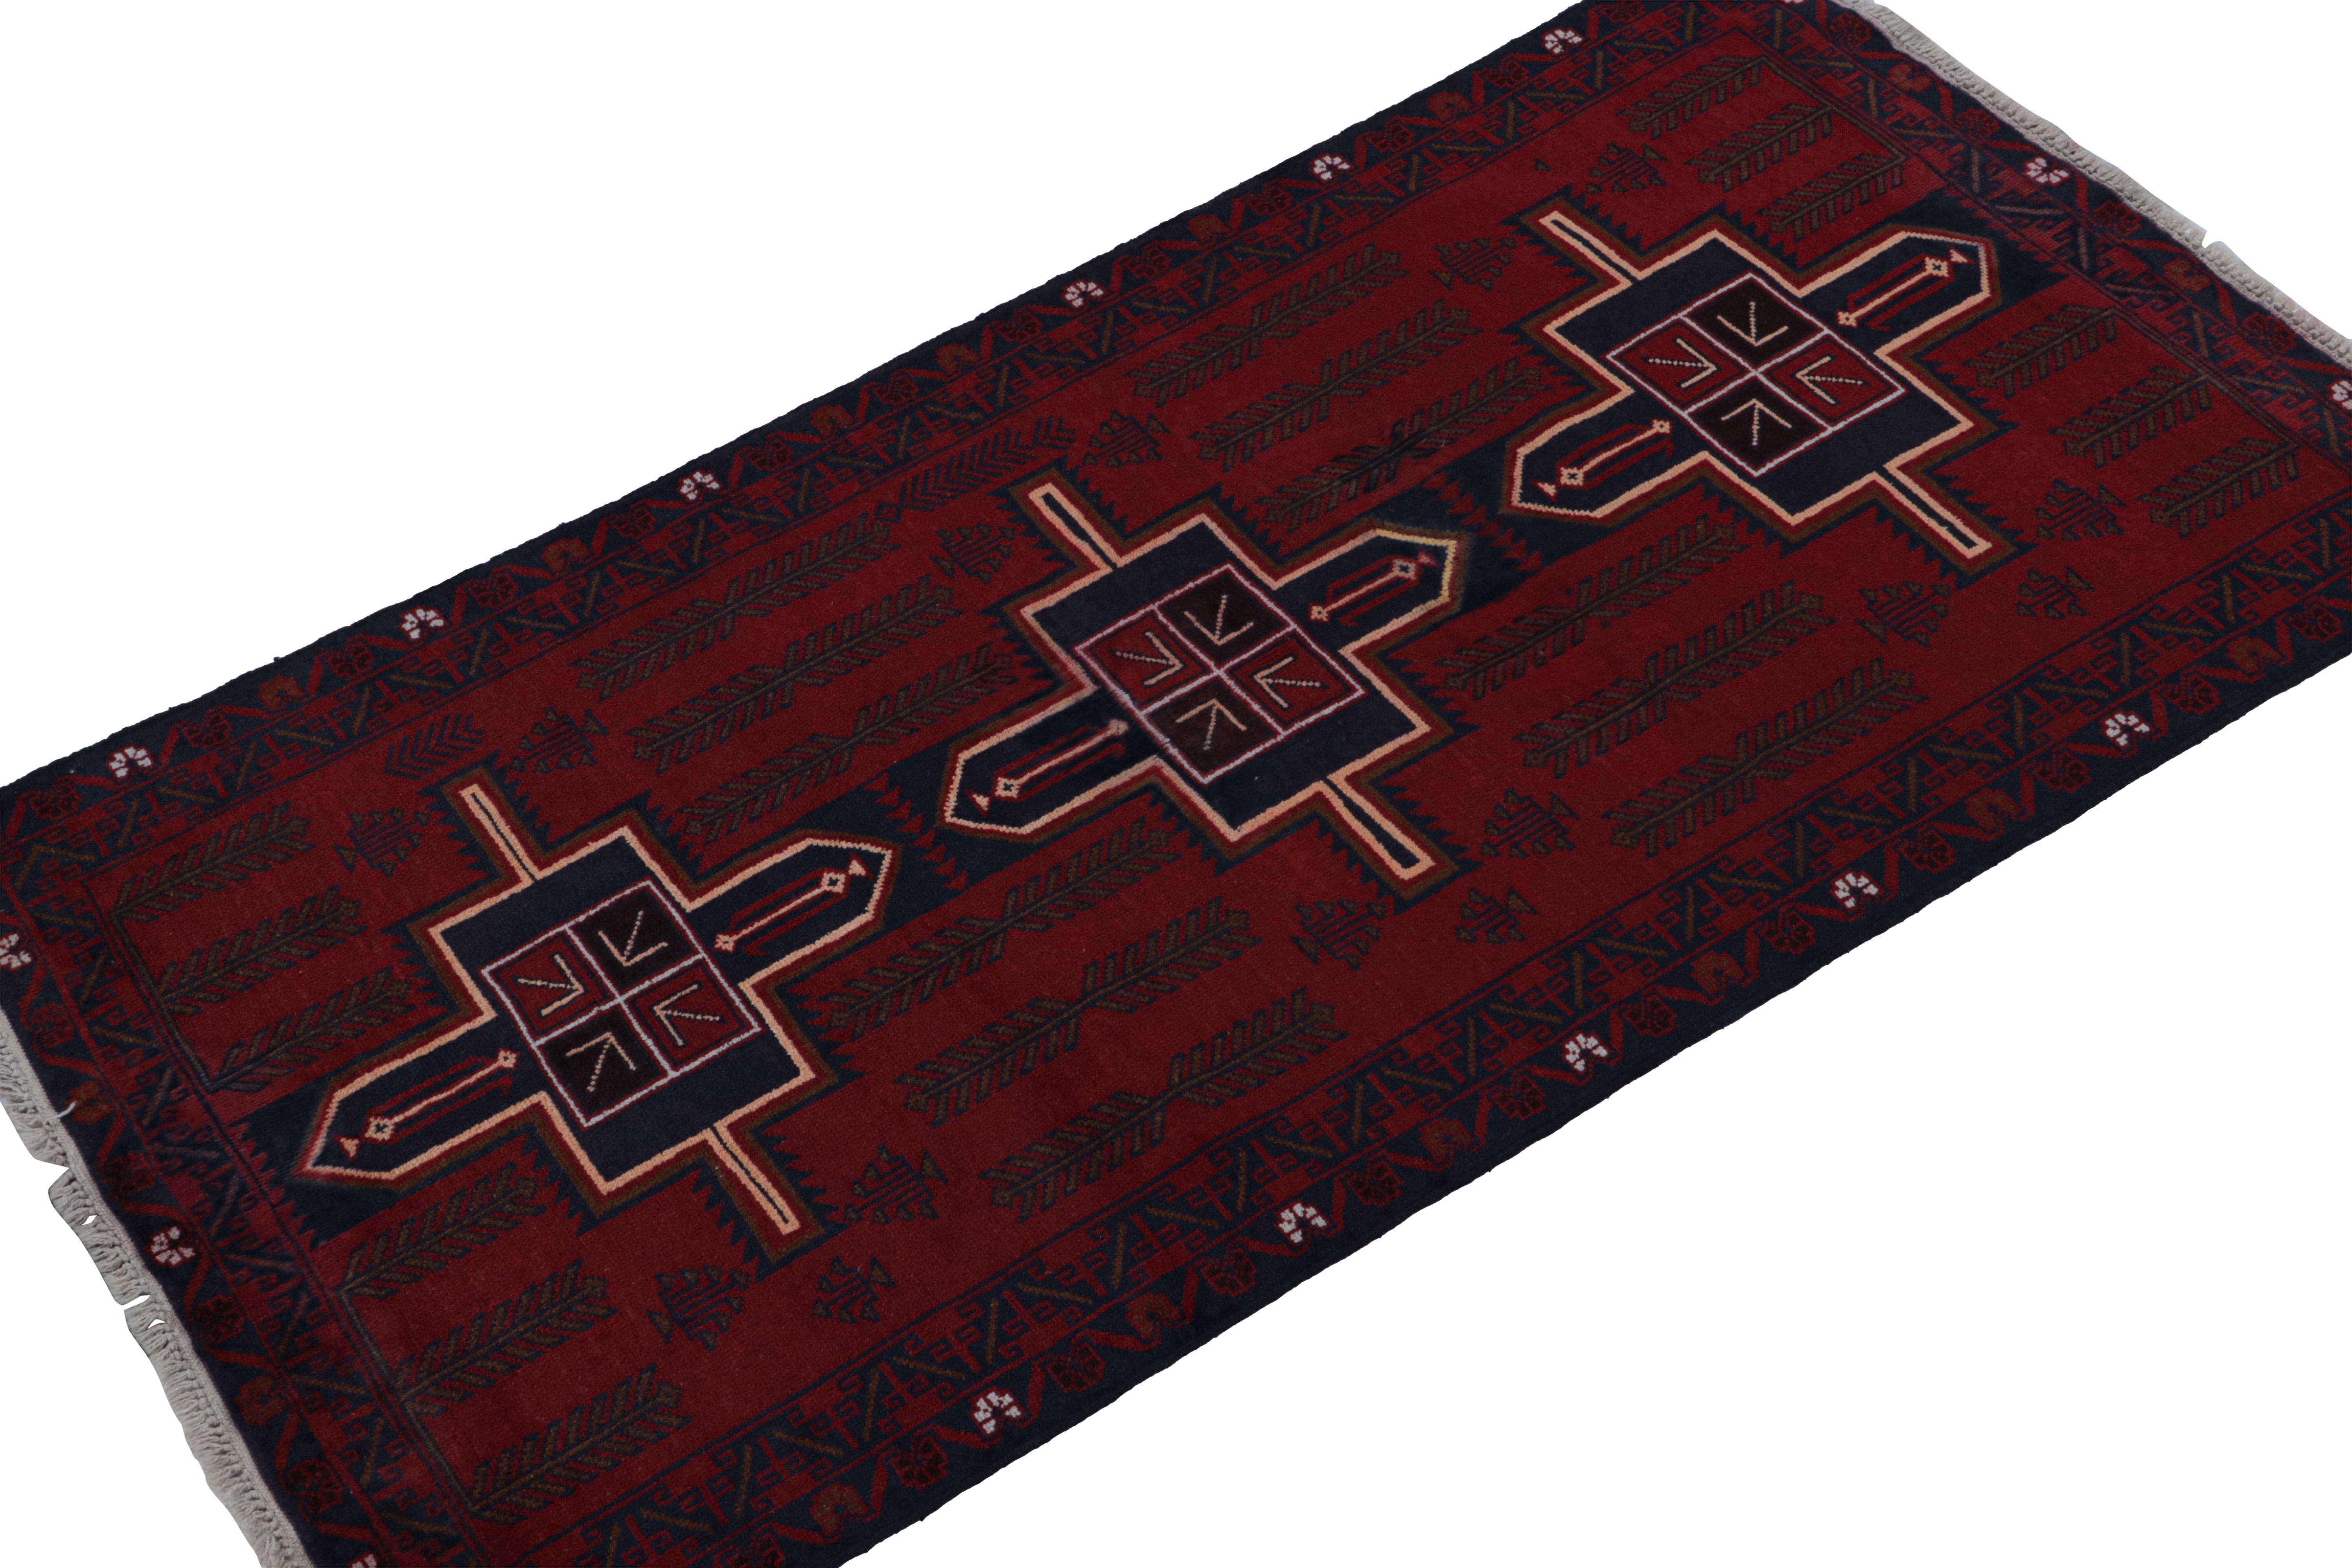 Hand-knotted in wool and goat hair circa 1950-1960, this 3x7 vintage tribal runner is a Baluch rug in an exciting curation from Rug & Kilim.

On the Design: 

This piece enjoys the rich burgundy and navy blue tones favored in this provenance. A